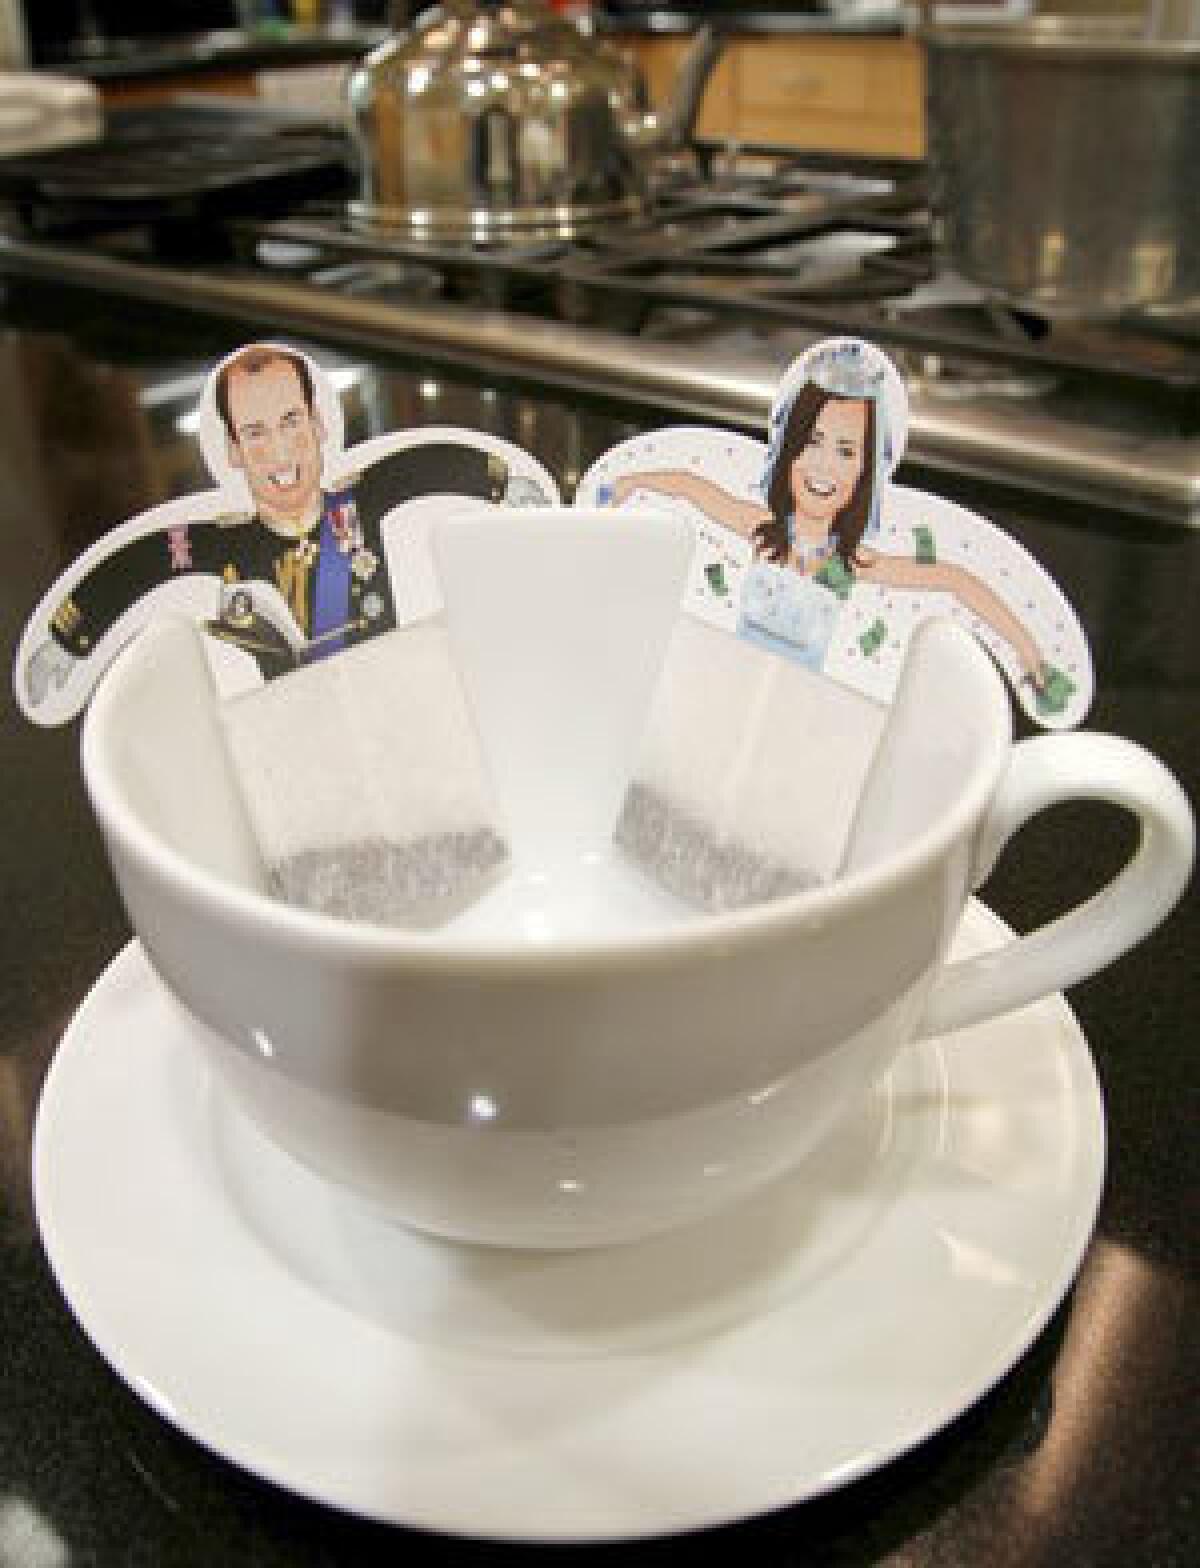 The KaTEA & William greeting card comes with tea bags topped with cutouts of the royal couple.